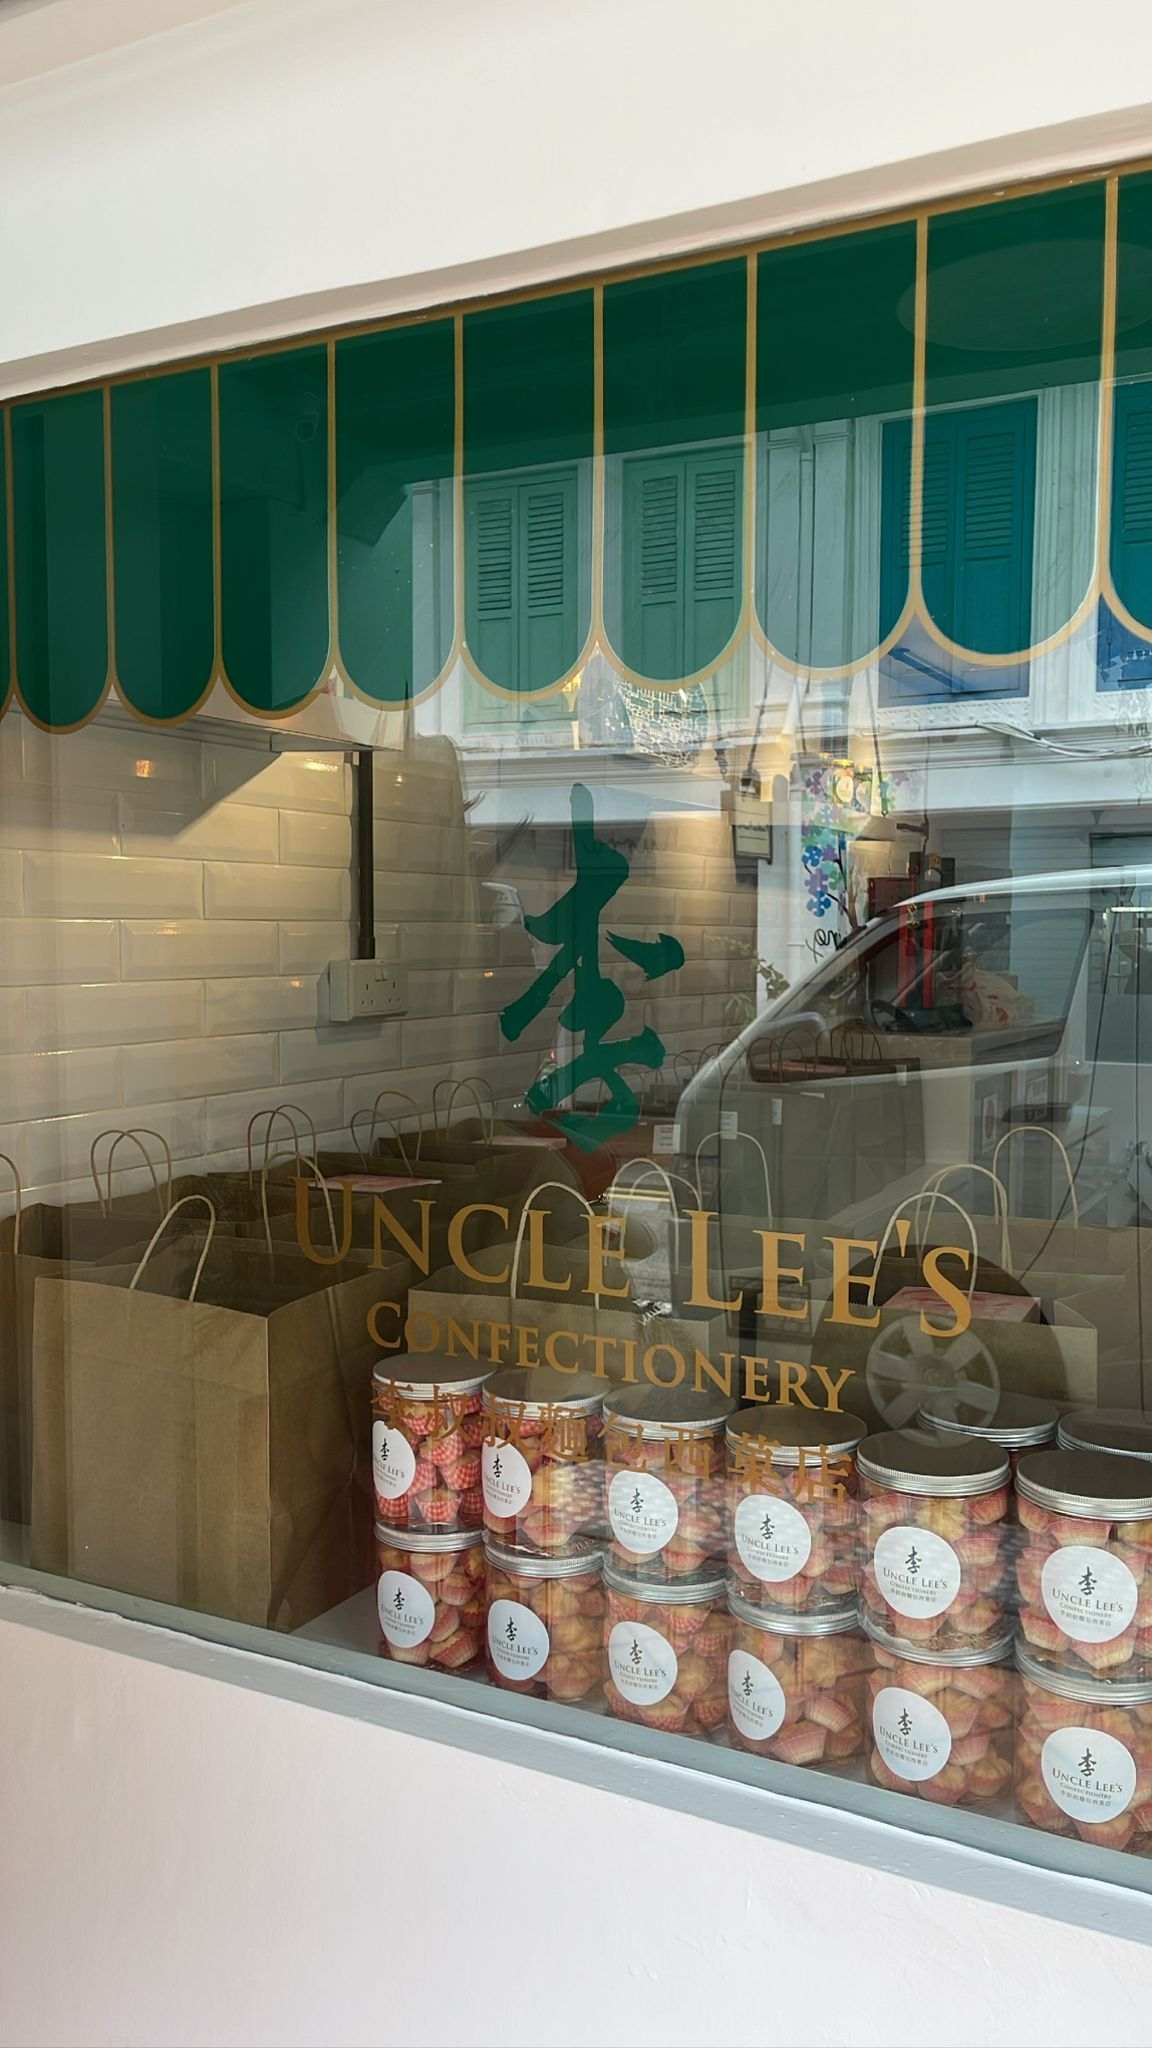 uncle lee confectionery store front